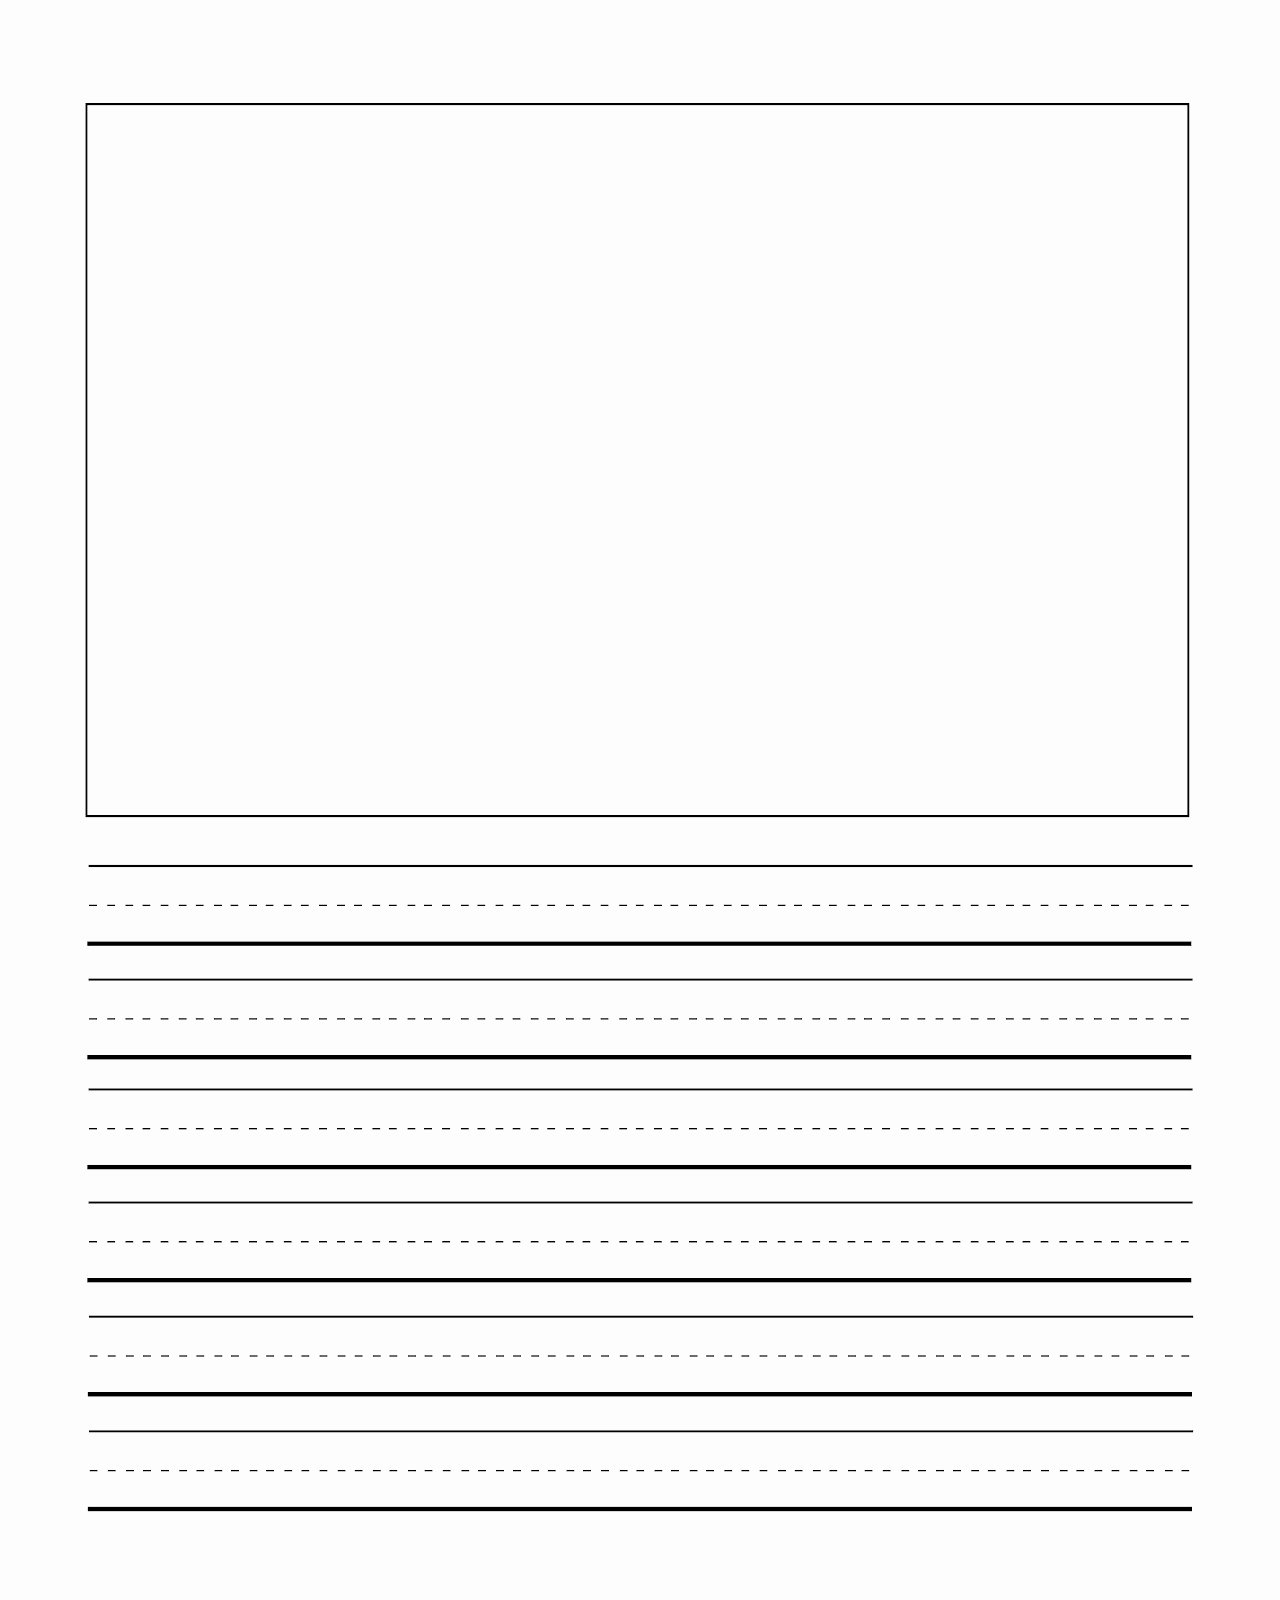 Kindergarten Writing Paper Printable New Clip Art by Carrie Teaching First Journal Writing